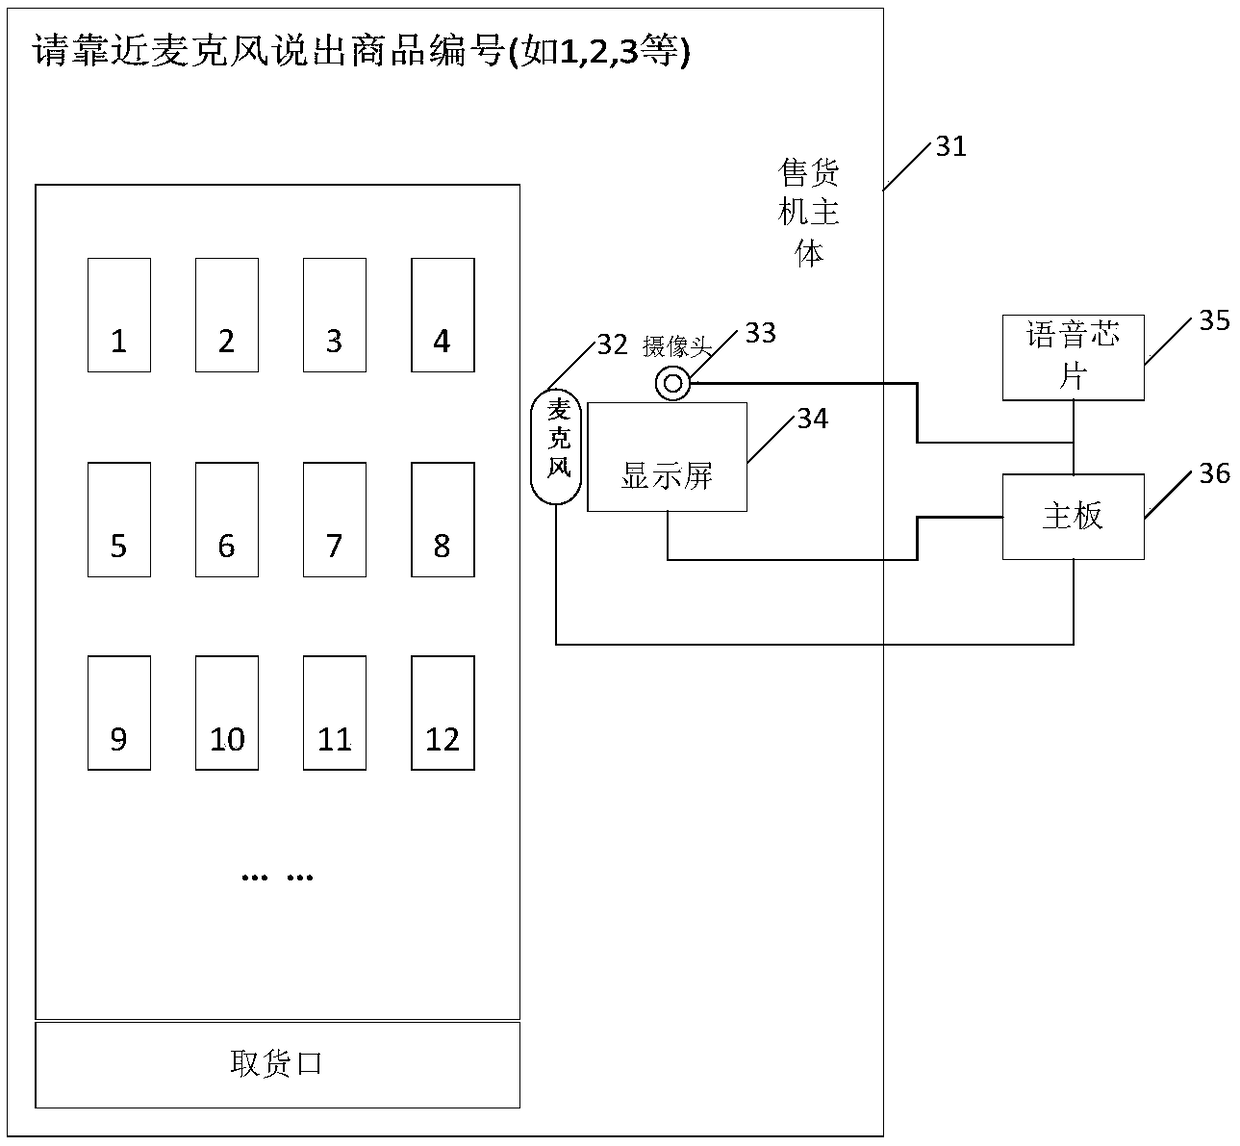 Automatic vending method and automatic vending machine